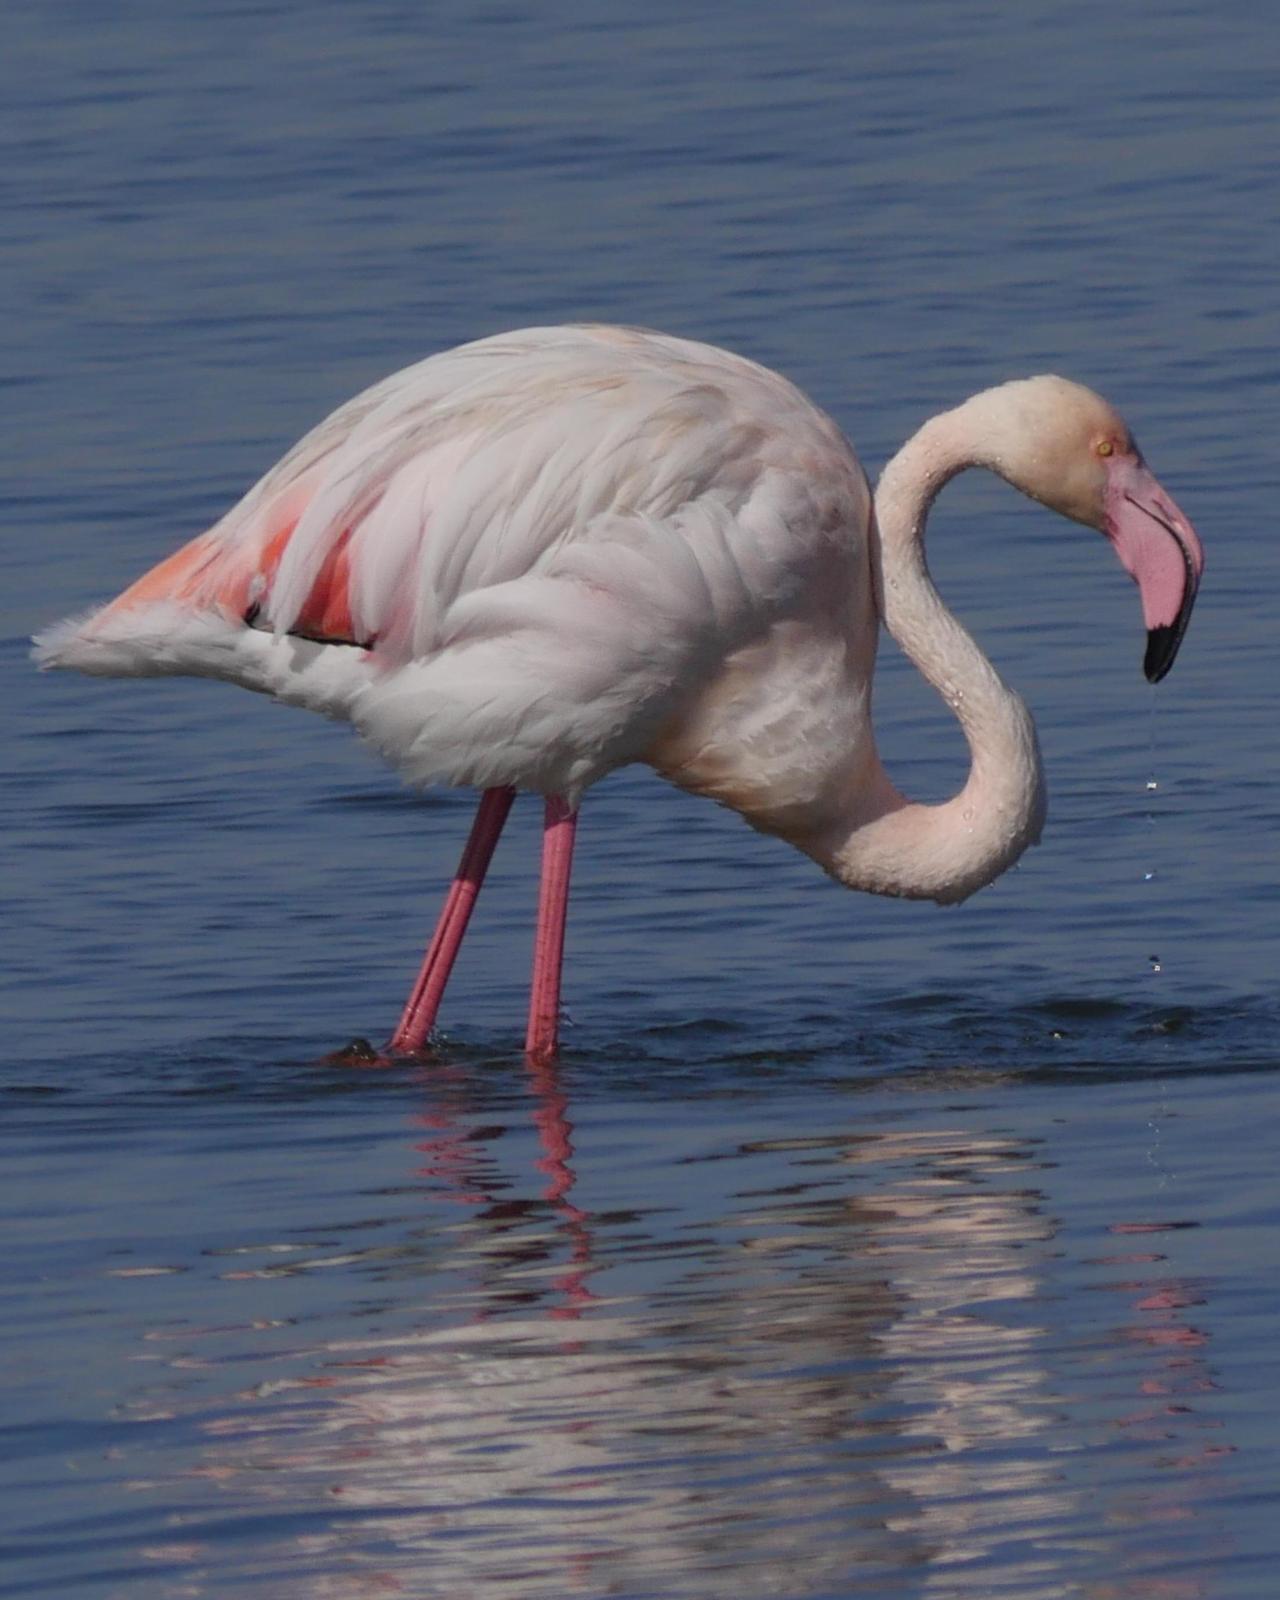 Greater Flamingo Photo by Peter Lowe